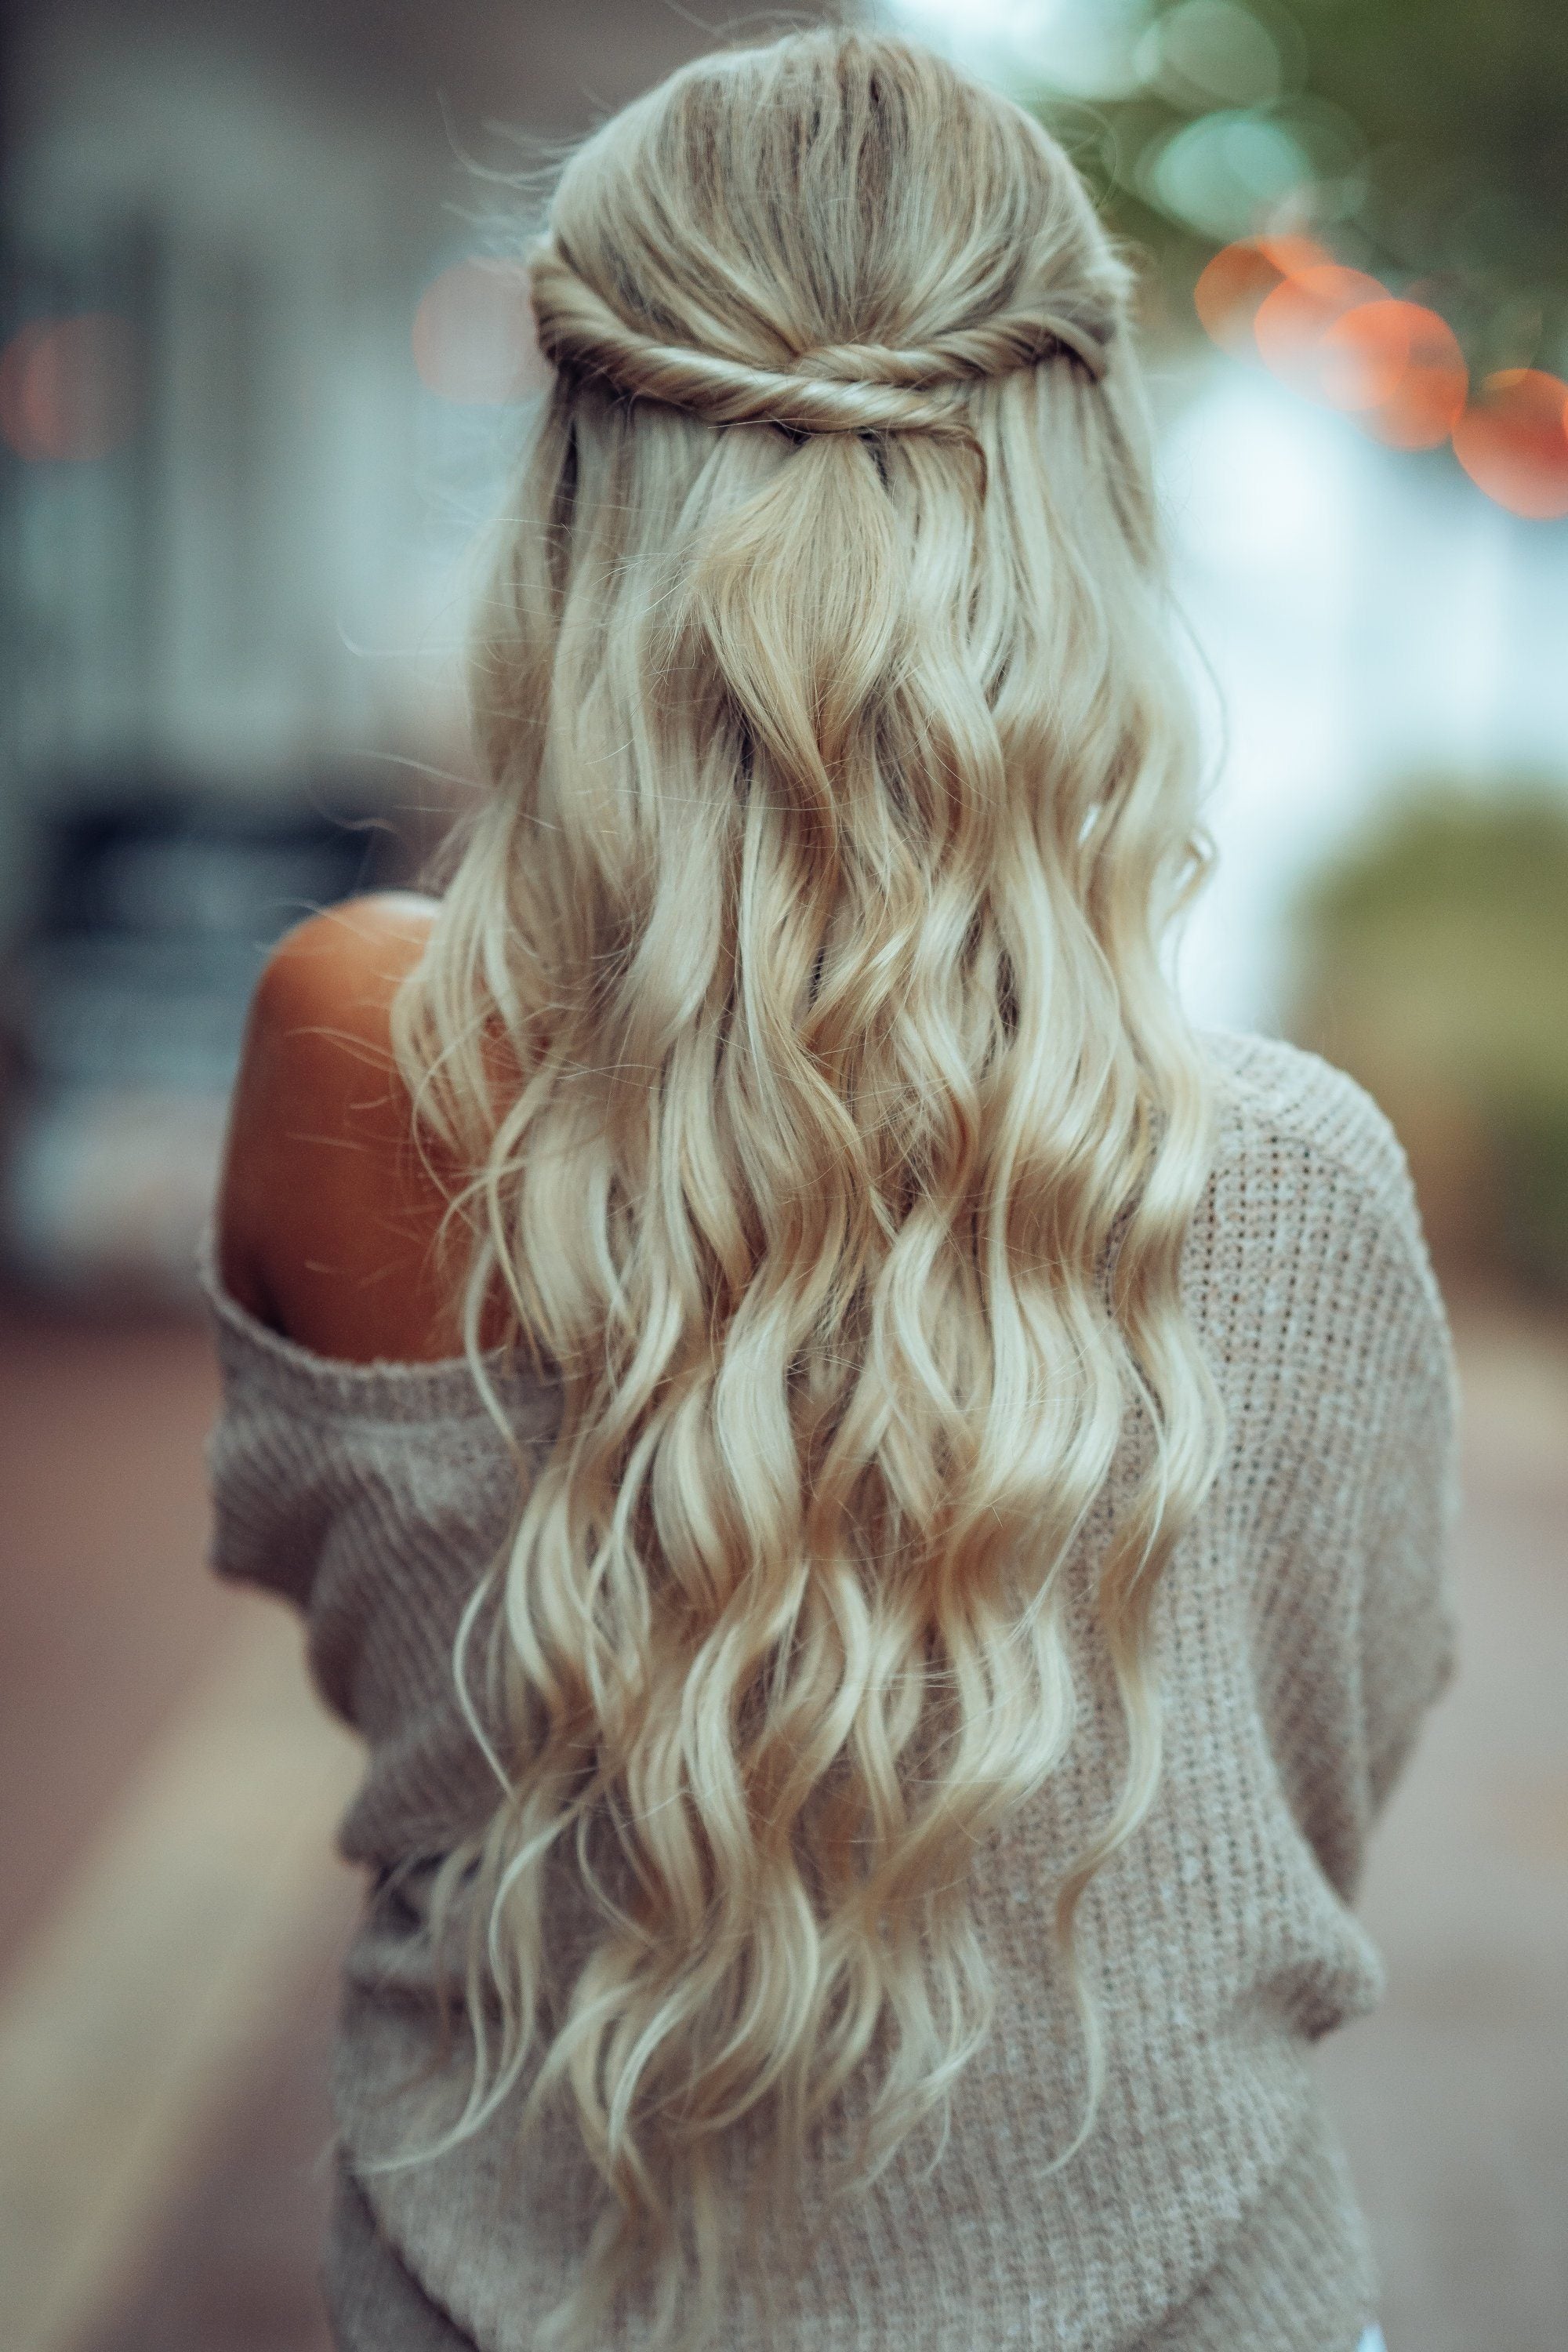 6 Stunning Lazy Girl Hairstyles to Do at Home